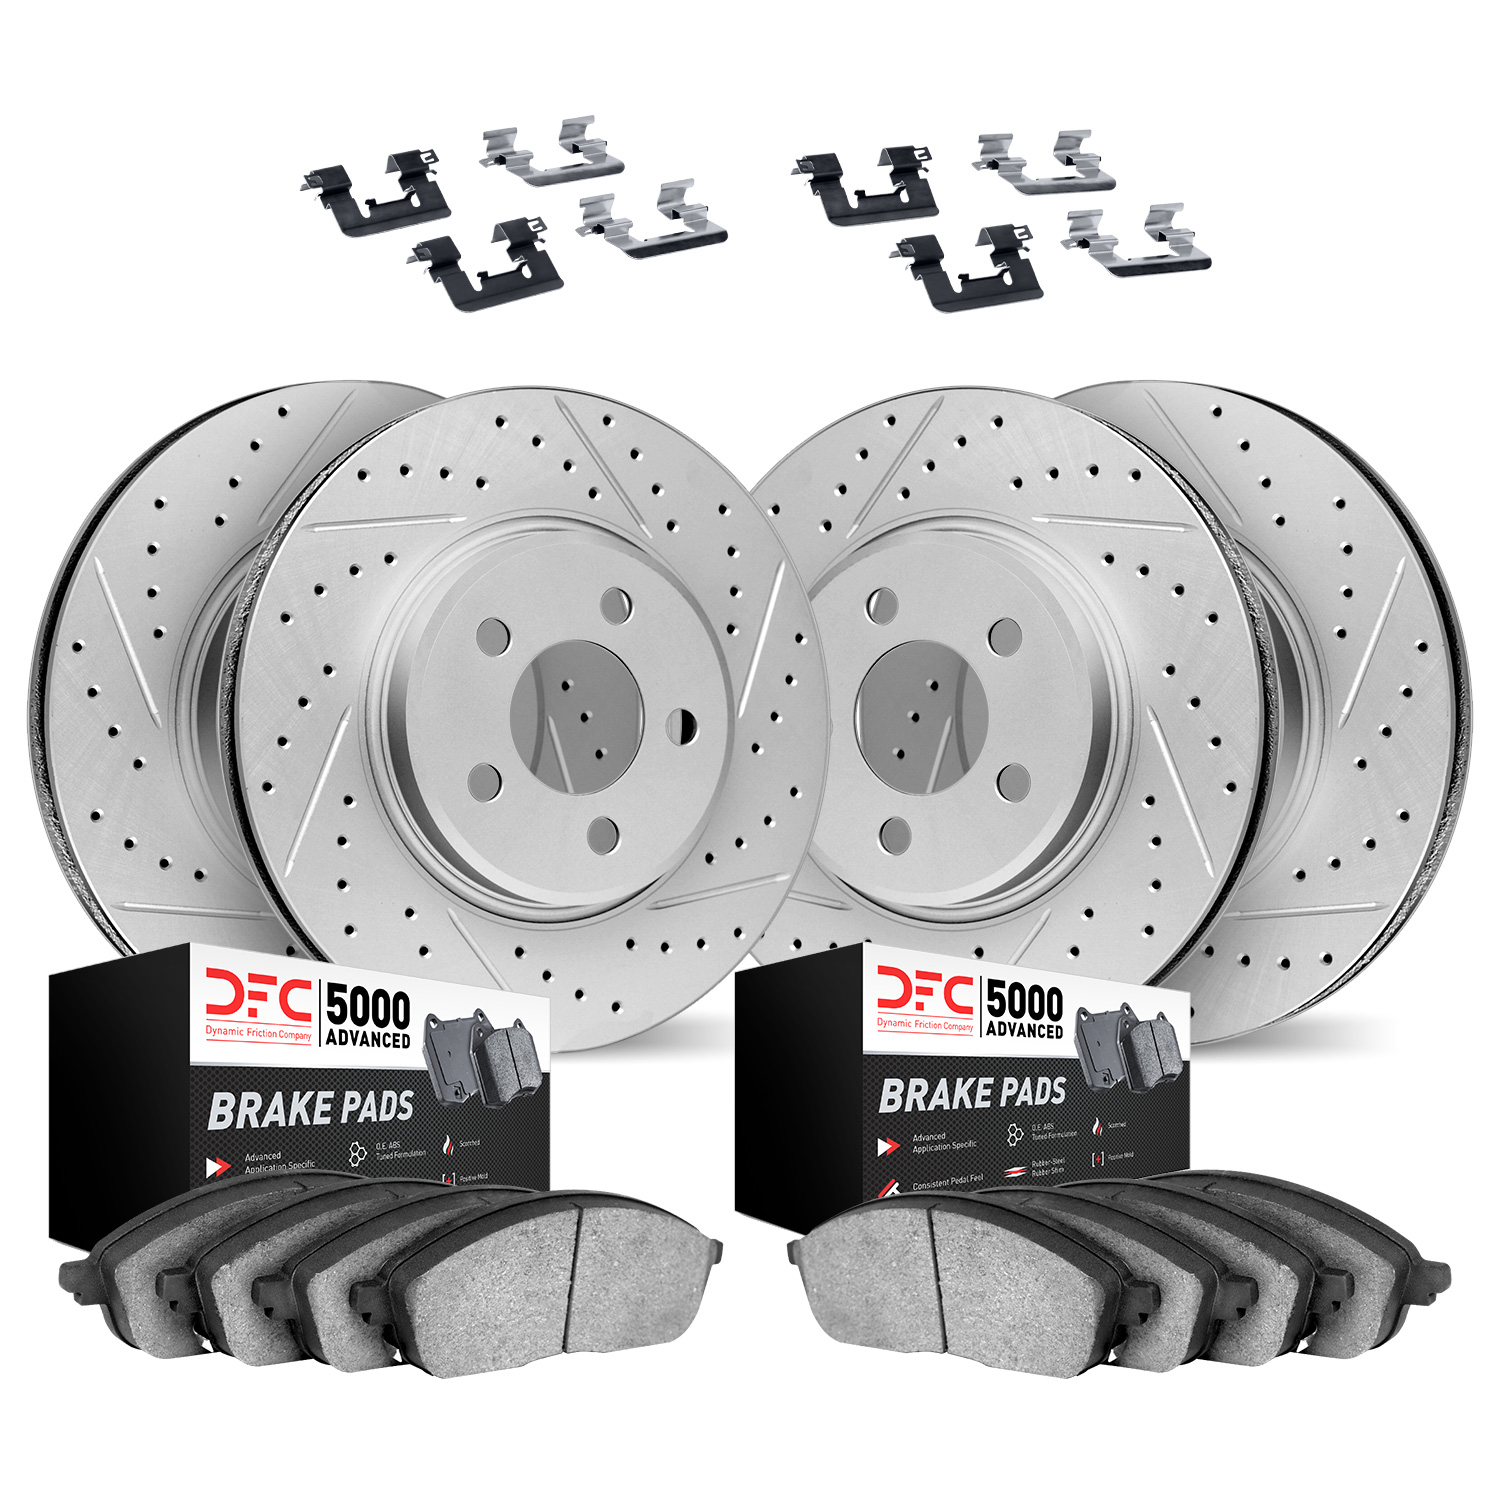 2514-46025 Geoperformance Drilled/Slotted Rotors w/5000 Advanced Brake Pads Kit & Hardware, 2013-2015 GM, Position: Front and Re